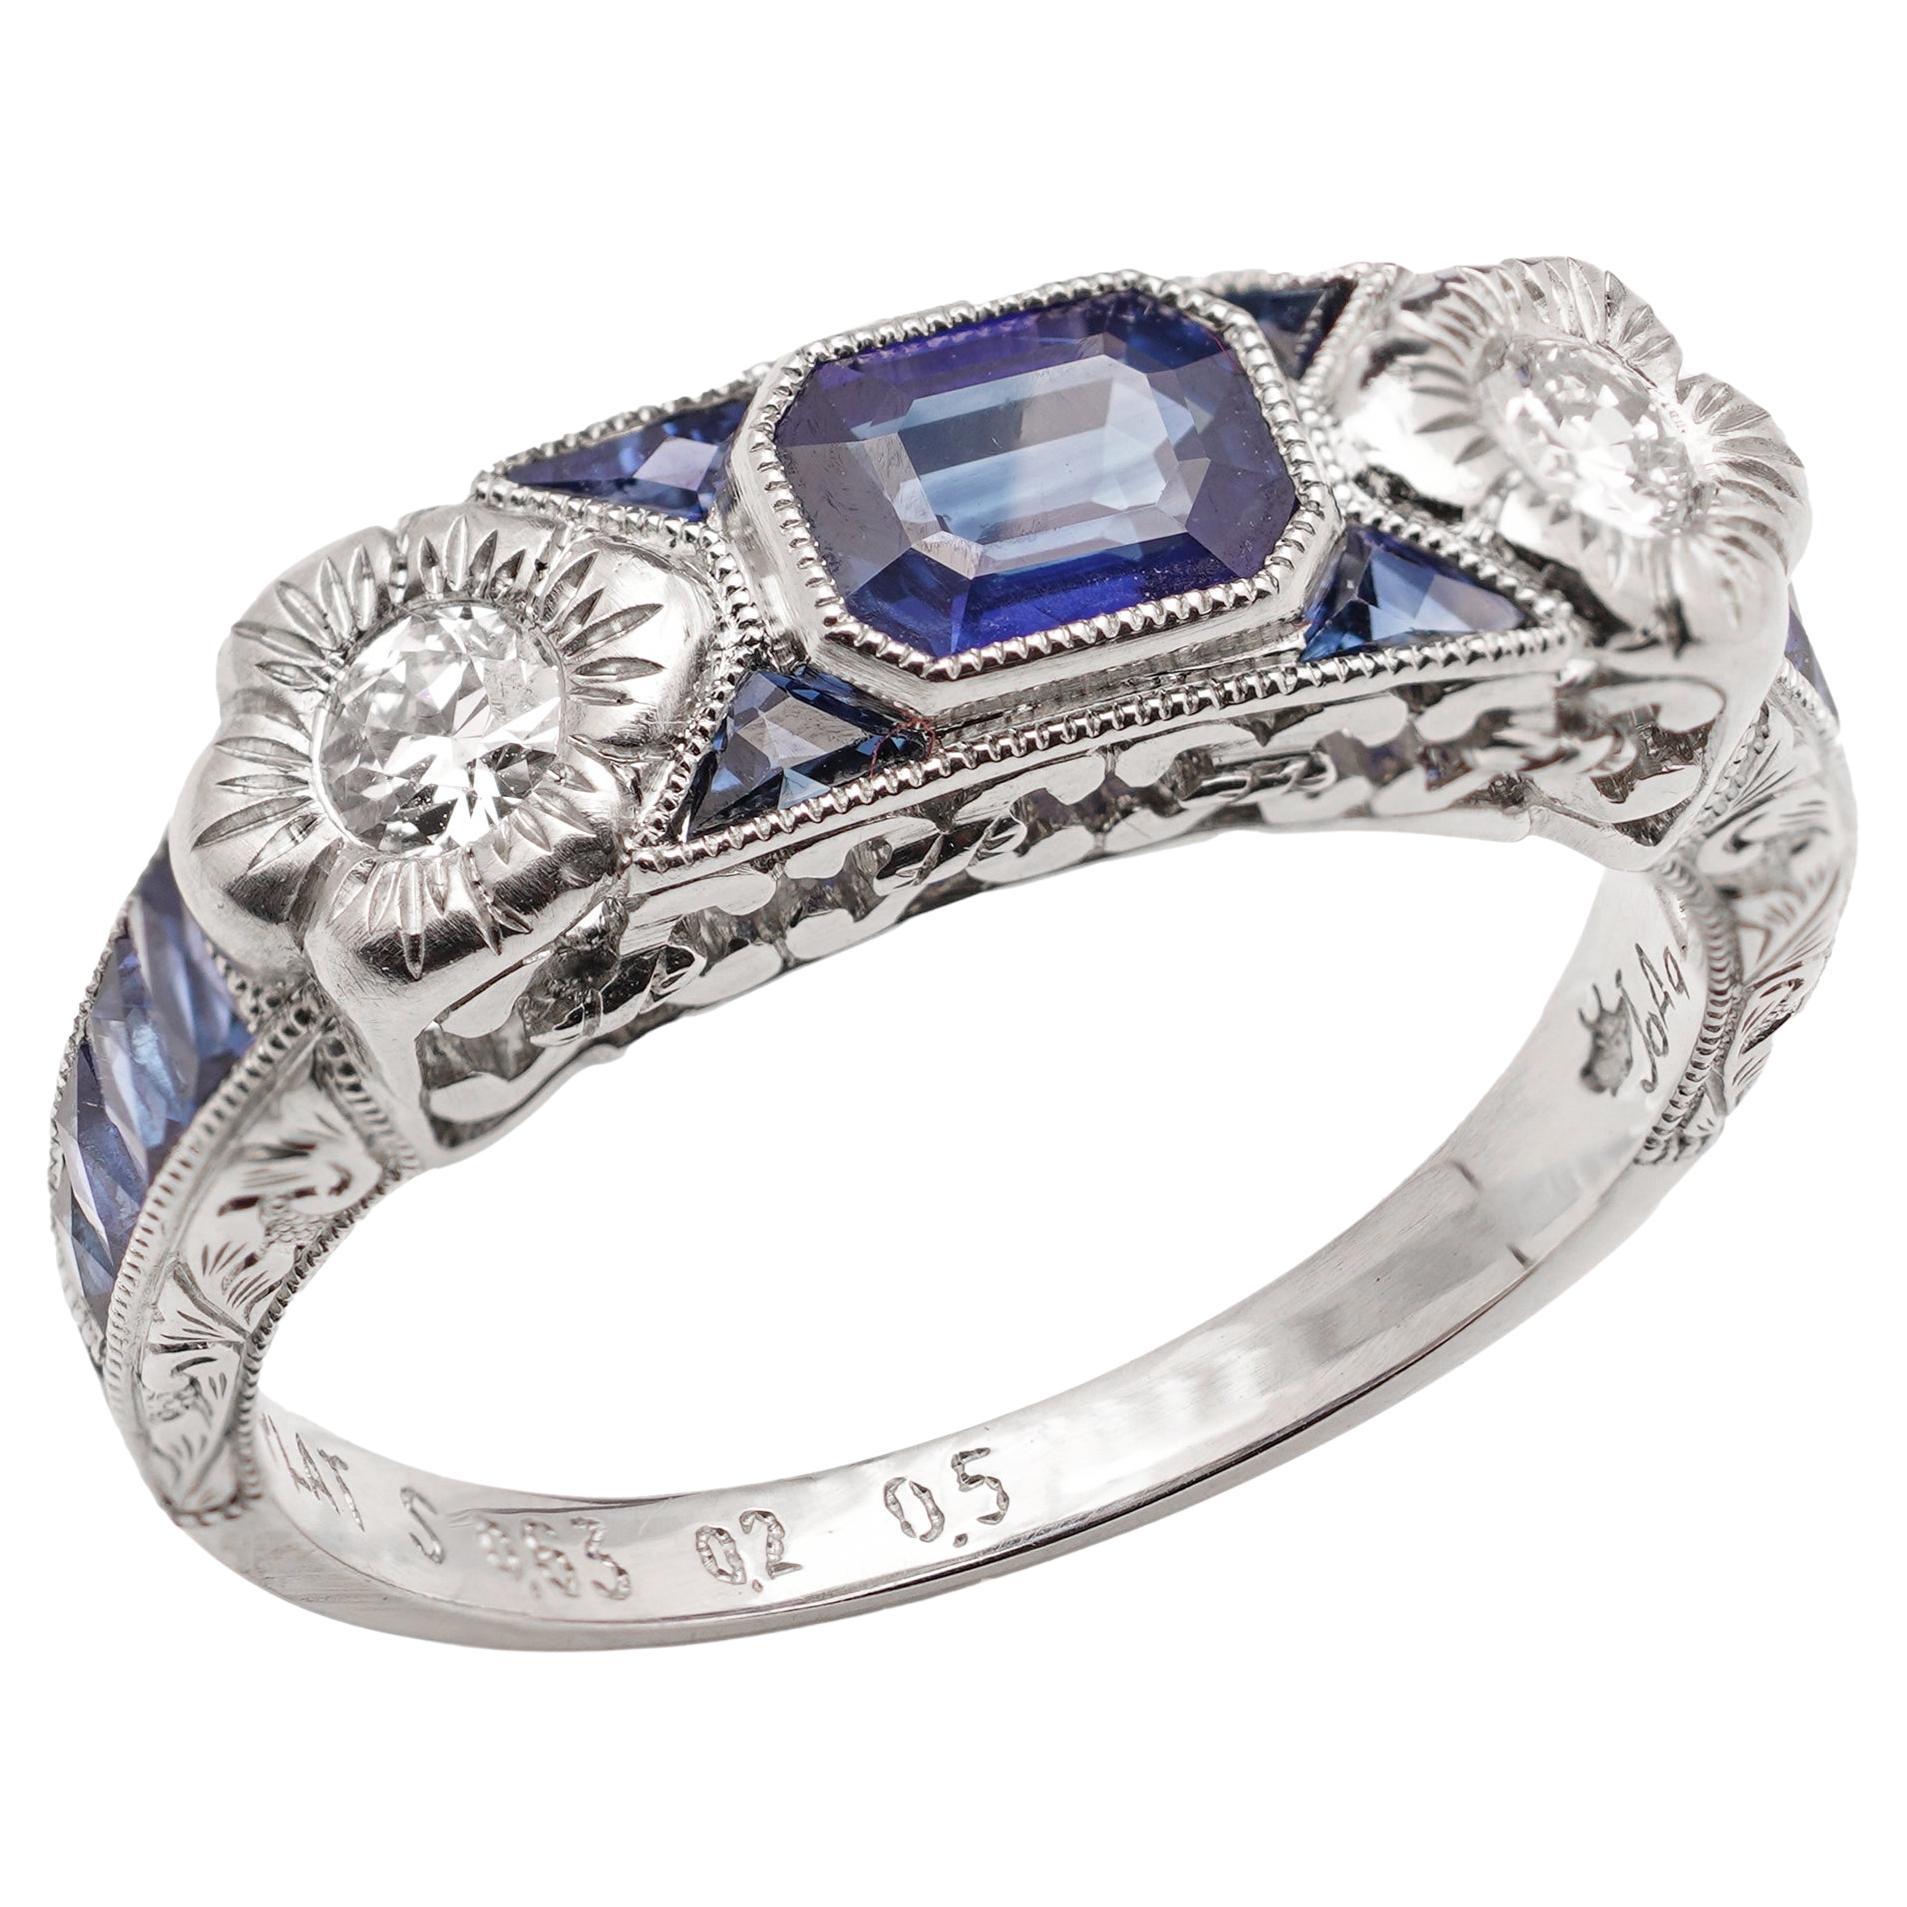 Platinum 0.63 carats of Emerald - cut Blue Sapphire ring For Sale